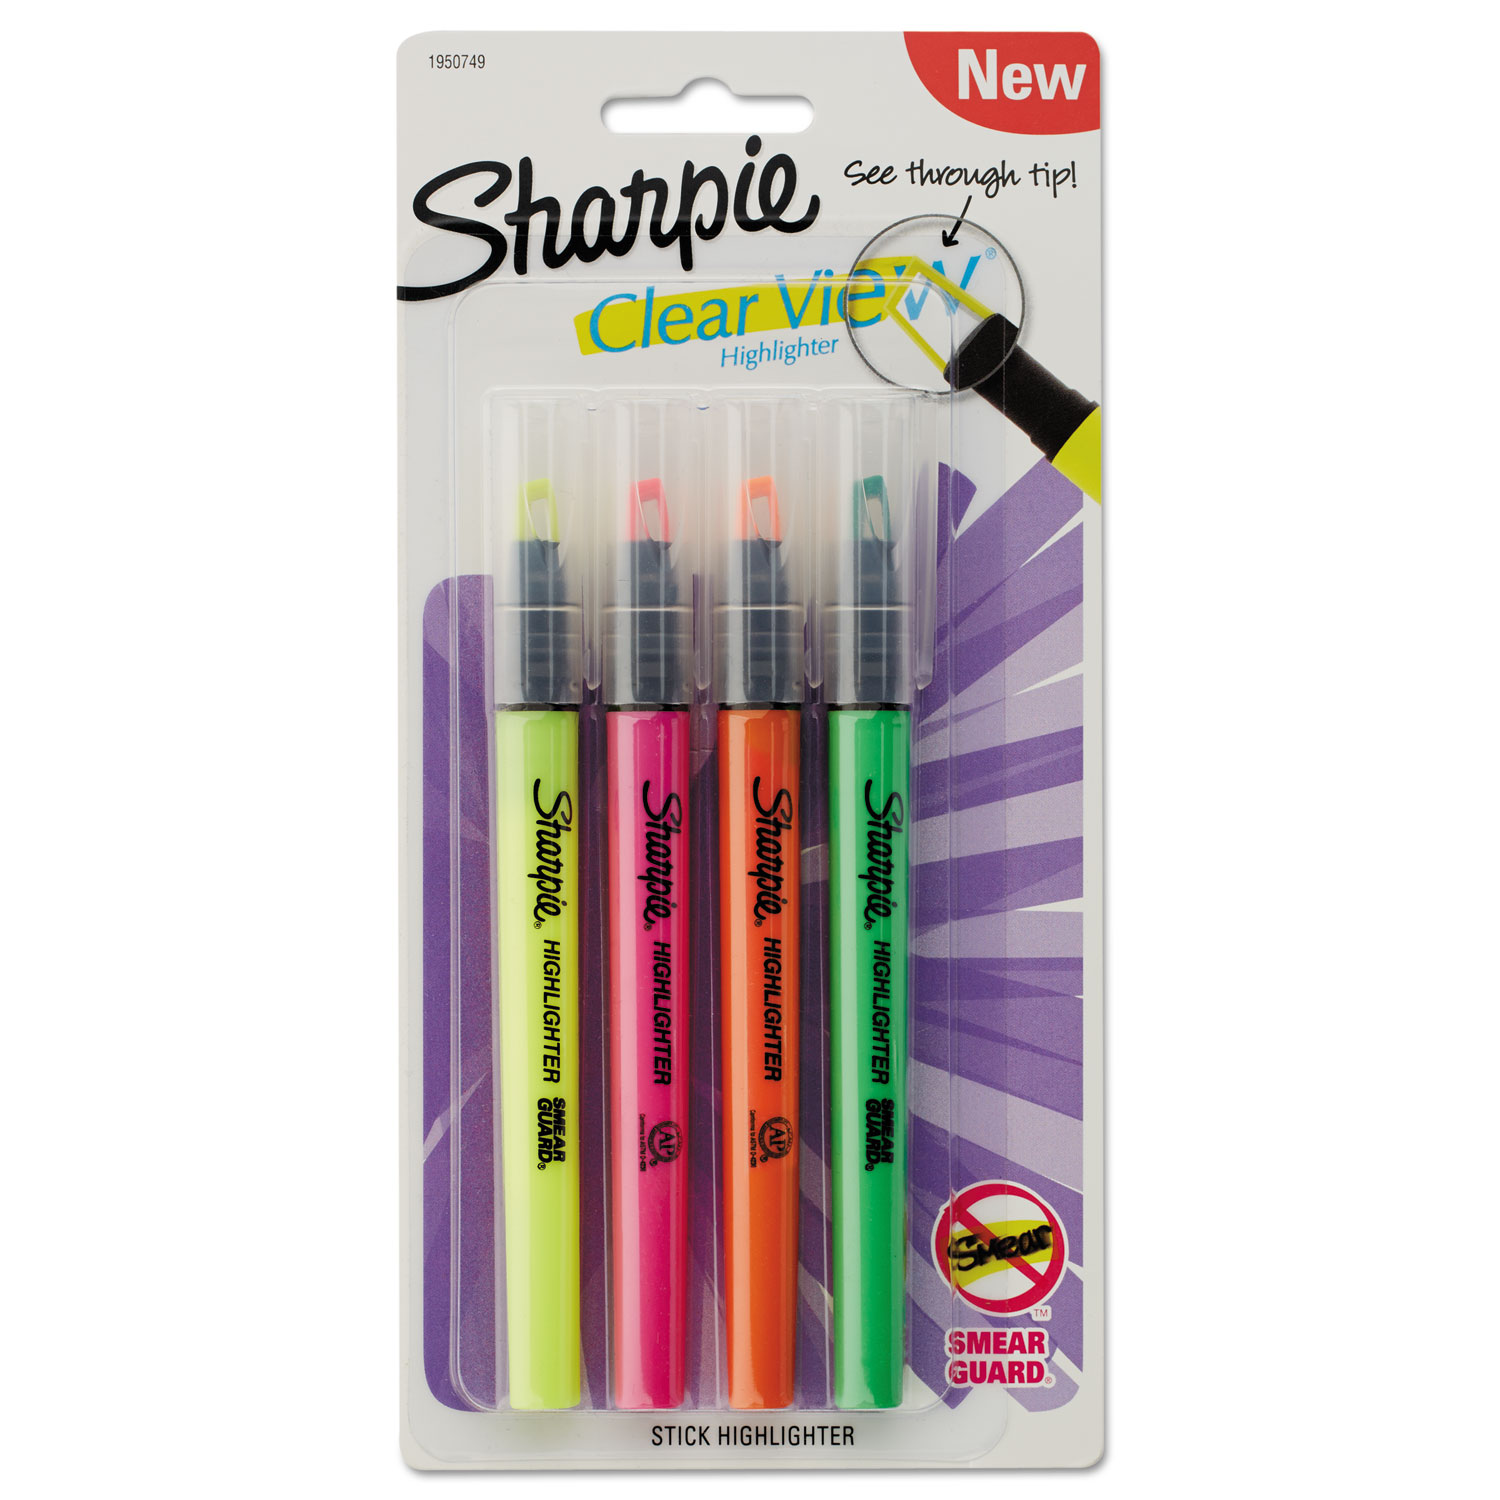 Case of 12 Packs of Flip Chart Sharpie Permanent Markers Box of 8 (22478) 